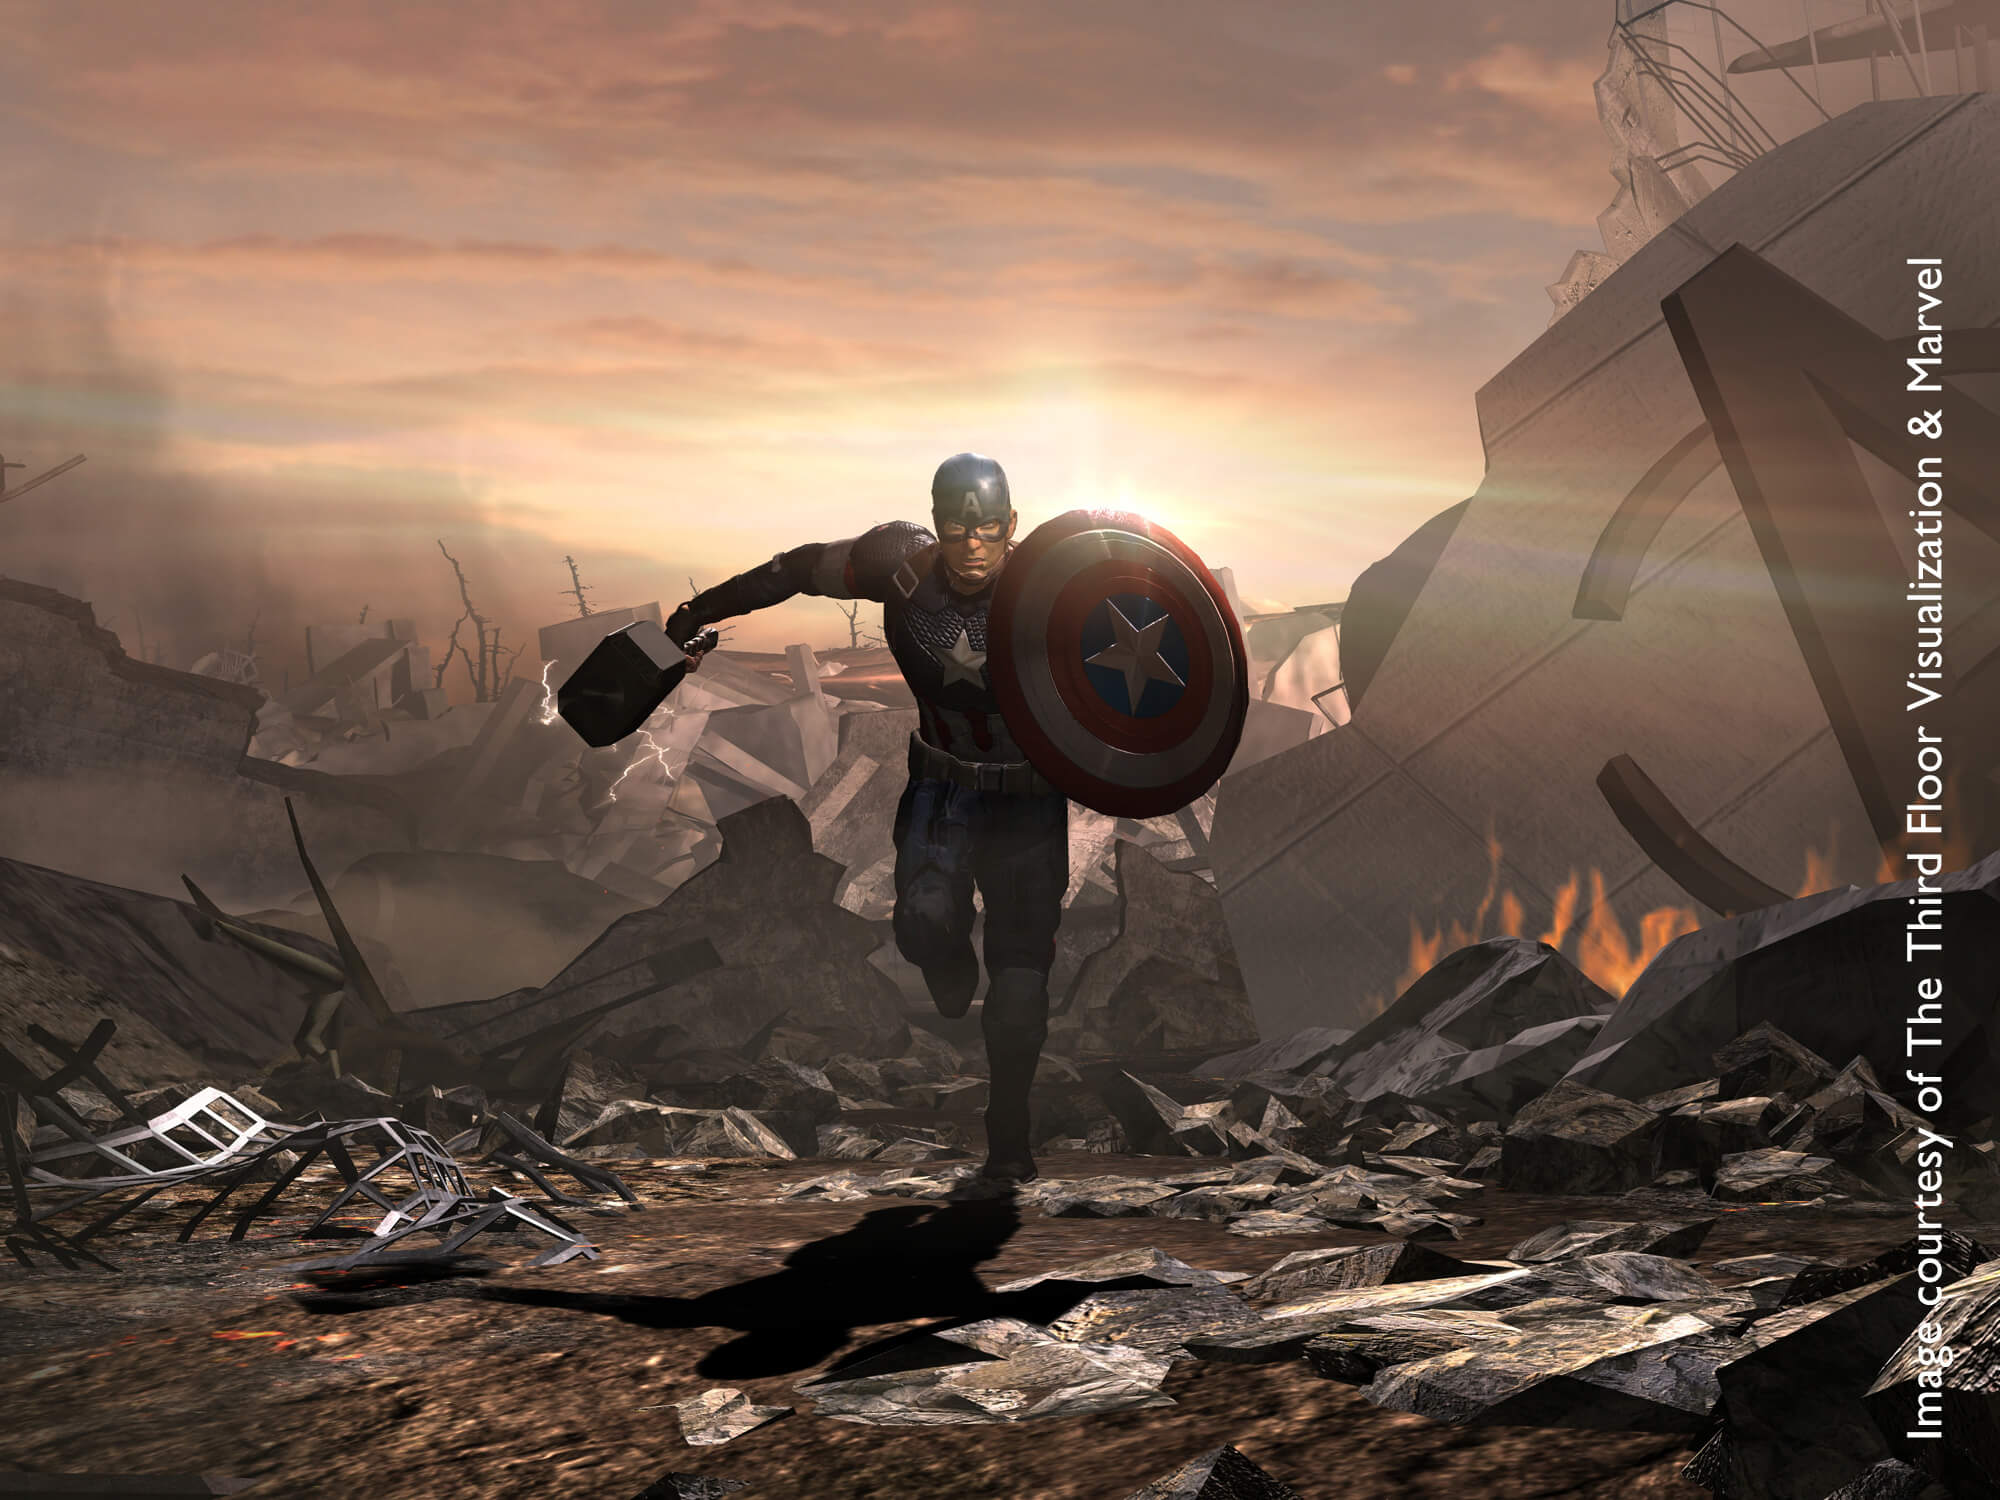 Previsualisation scene of Captain America running and holding his shield and Thor's hammer